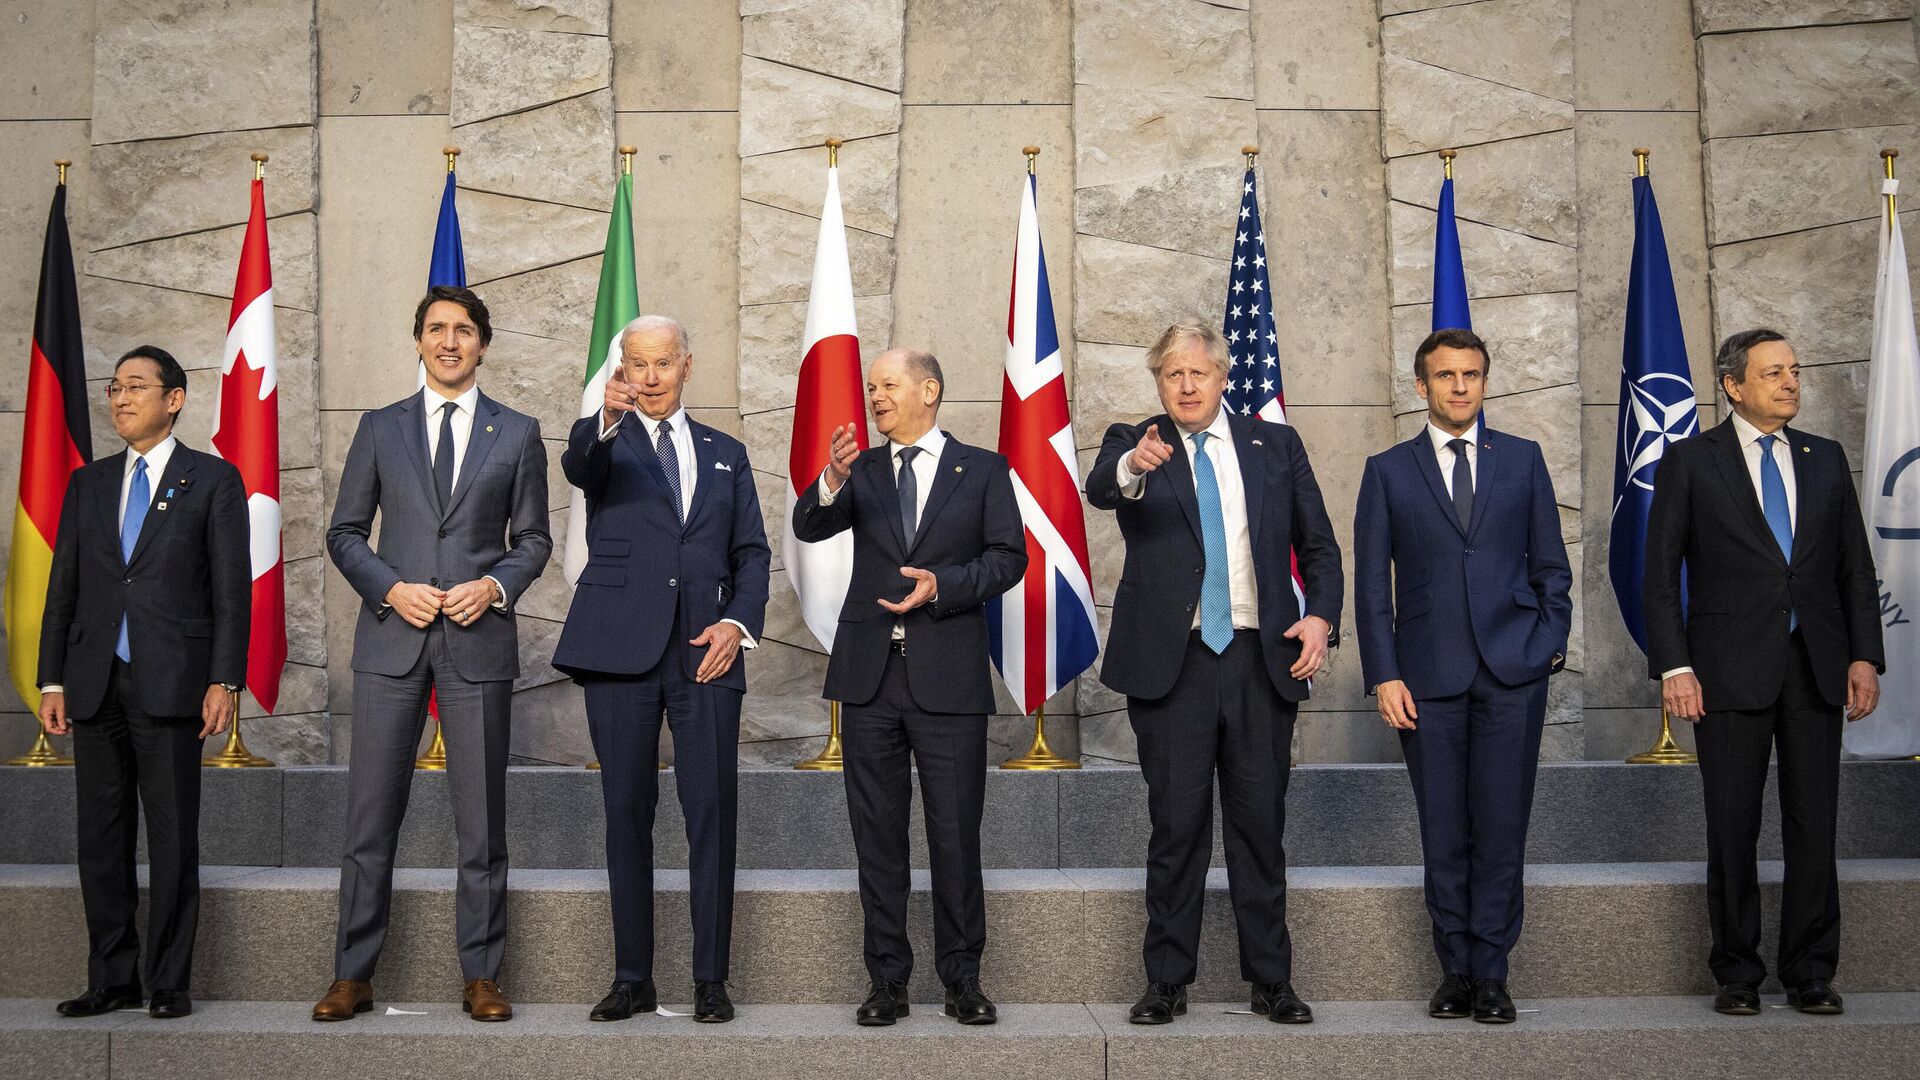 From left, Japan's Prime Minister Fumio Kishida, Canadian Prime Minister Justin Trudeau, U.S. President Joe Biden, German Chancellor Olaf Scholz, British Prime Minister Boris Johnson, French President Emmanuel Macron and Italian Prime Minister Mario Draghi pose for a group photo during an extraordinary NATO summit at NATO headquarters in Brussels, Belgium, Thursday, March 24, 2022. - Sputnik International, 1920, 07.04.2022